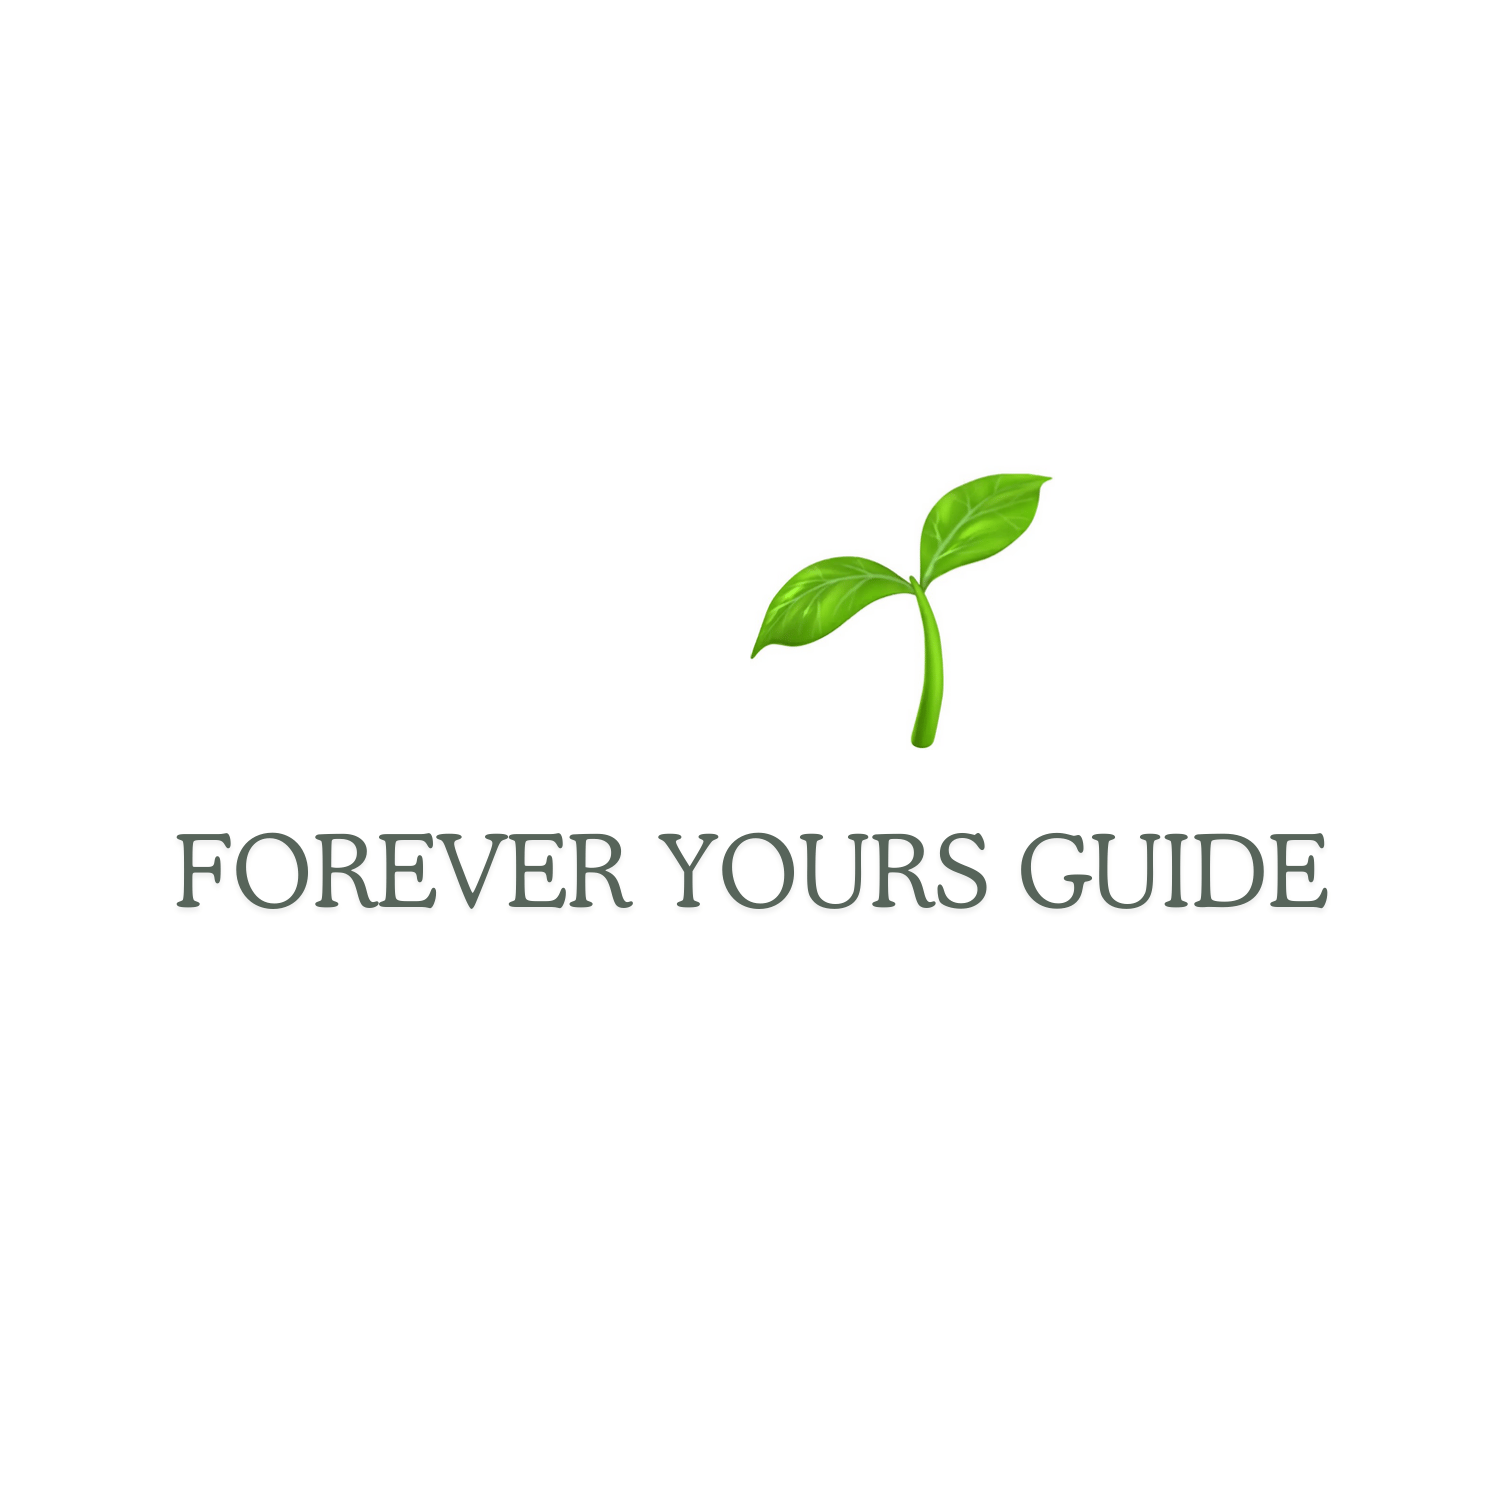 forever yours guide님의 프로필 사진